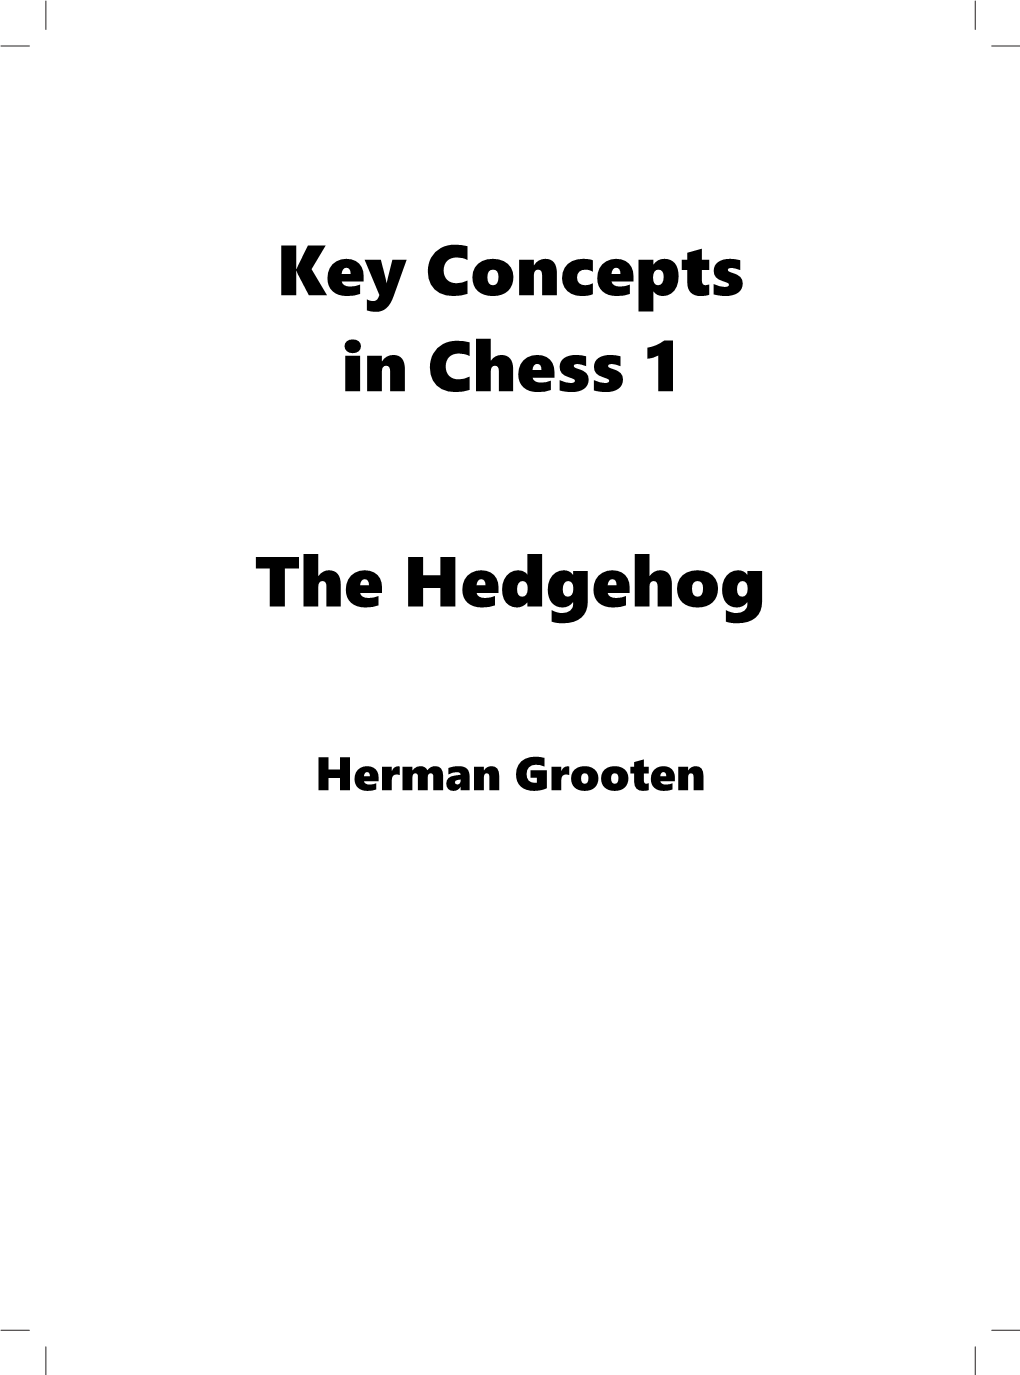 Key Concepts in Chess 1 the Hedgehog